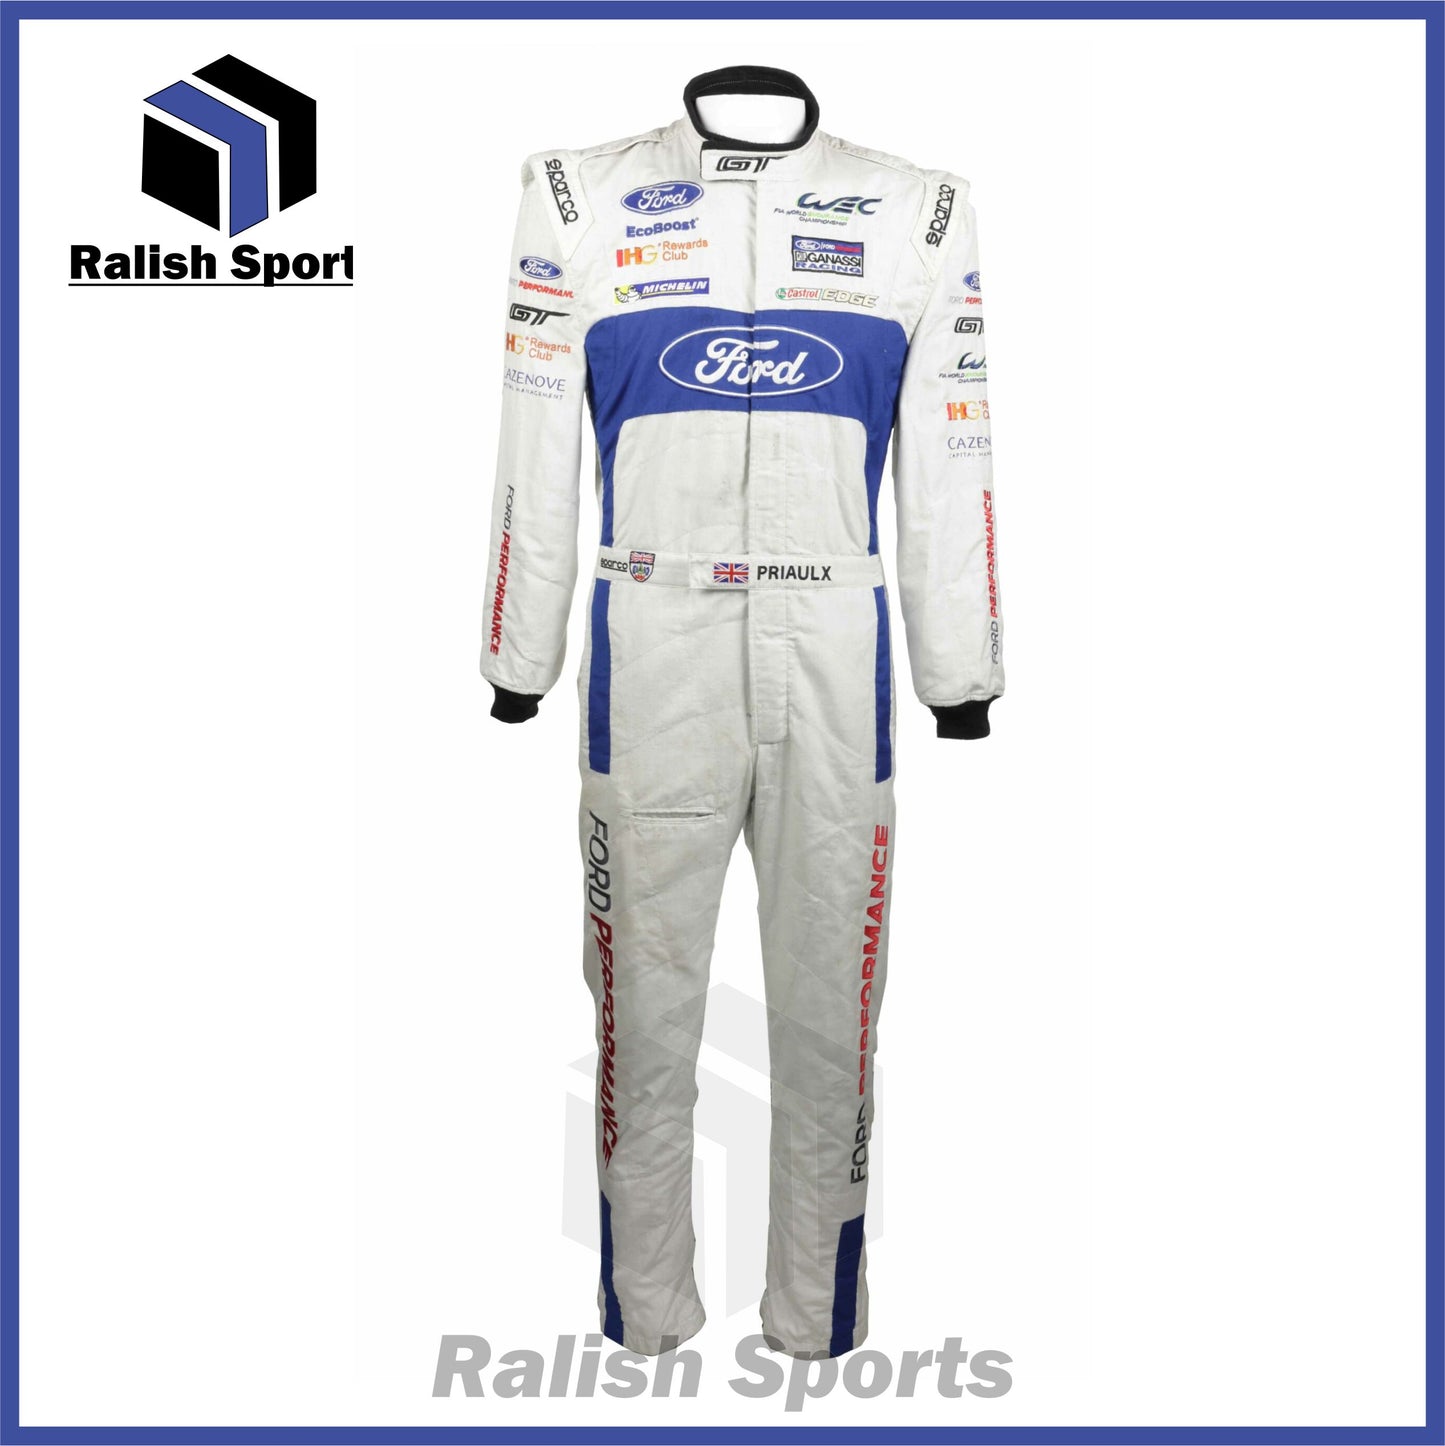 2017 Andy Priaulx Ford GT Chip Ganassi Racing Le Mans 24Hr Suit